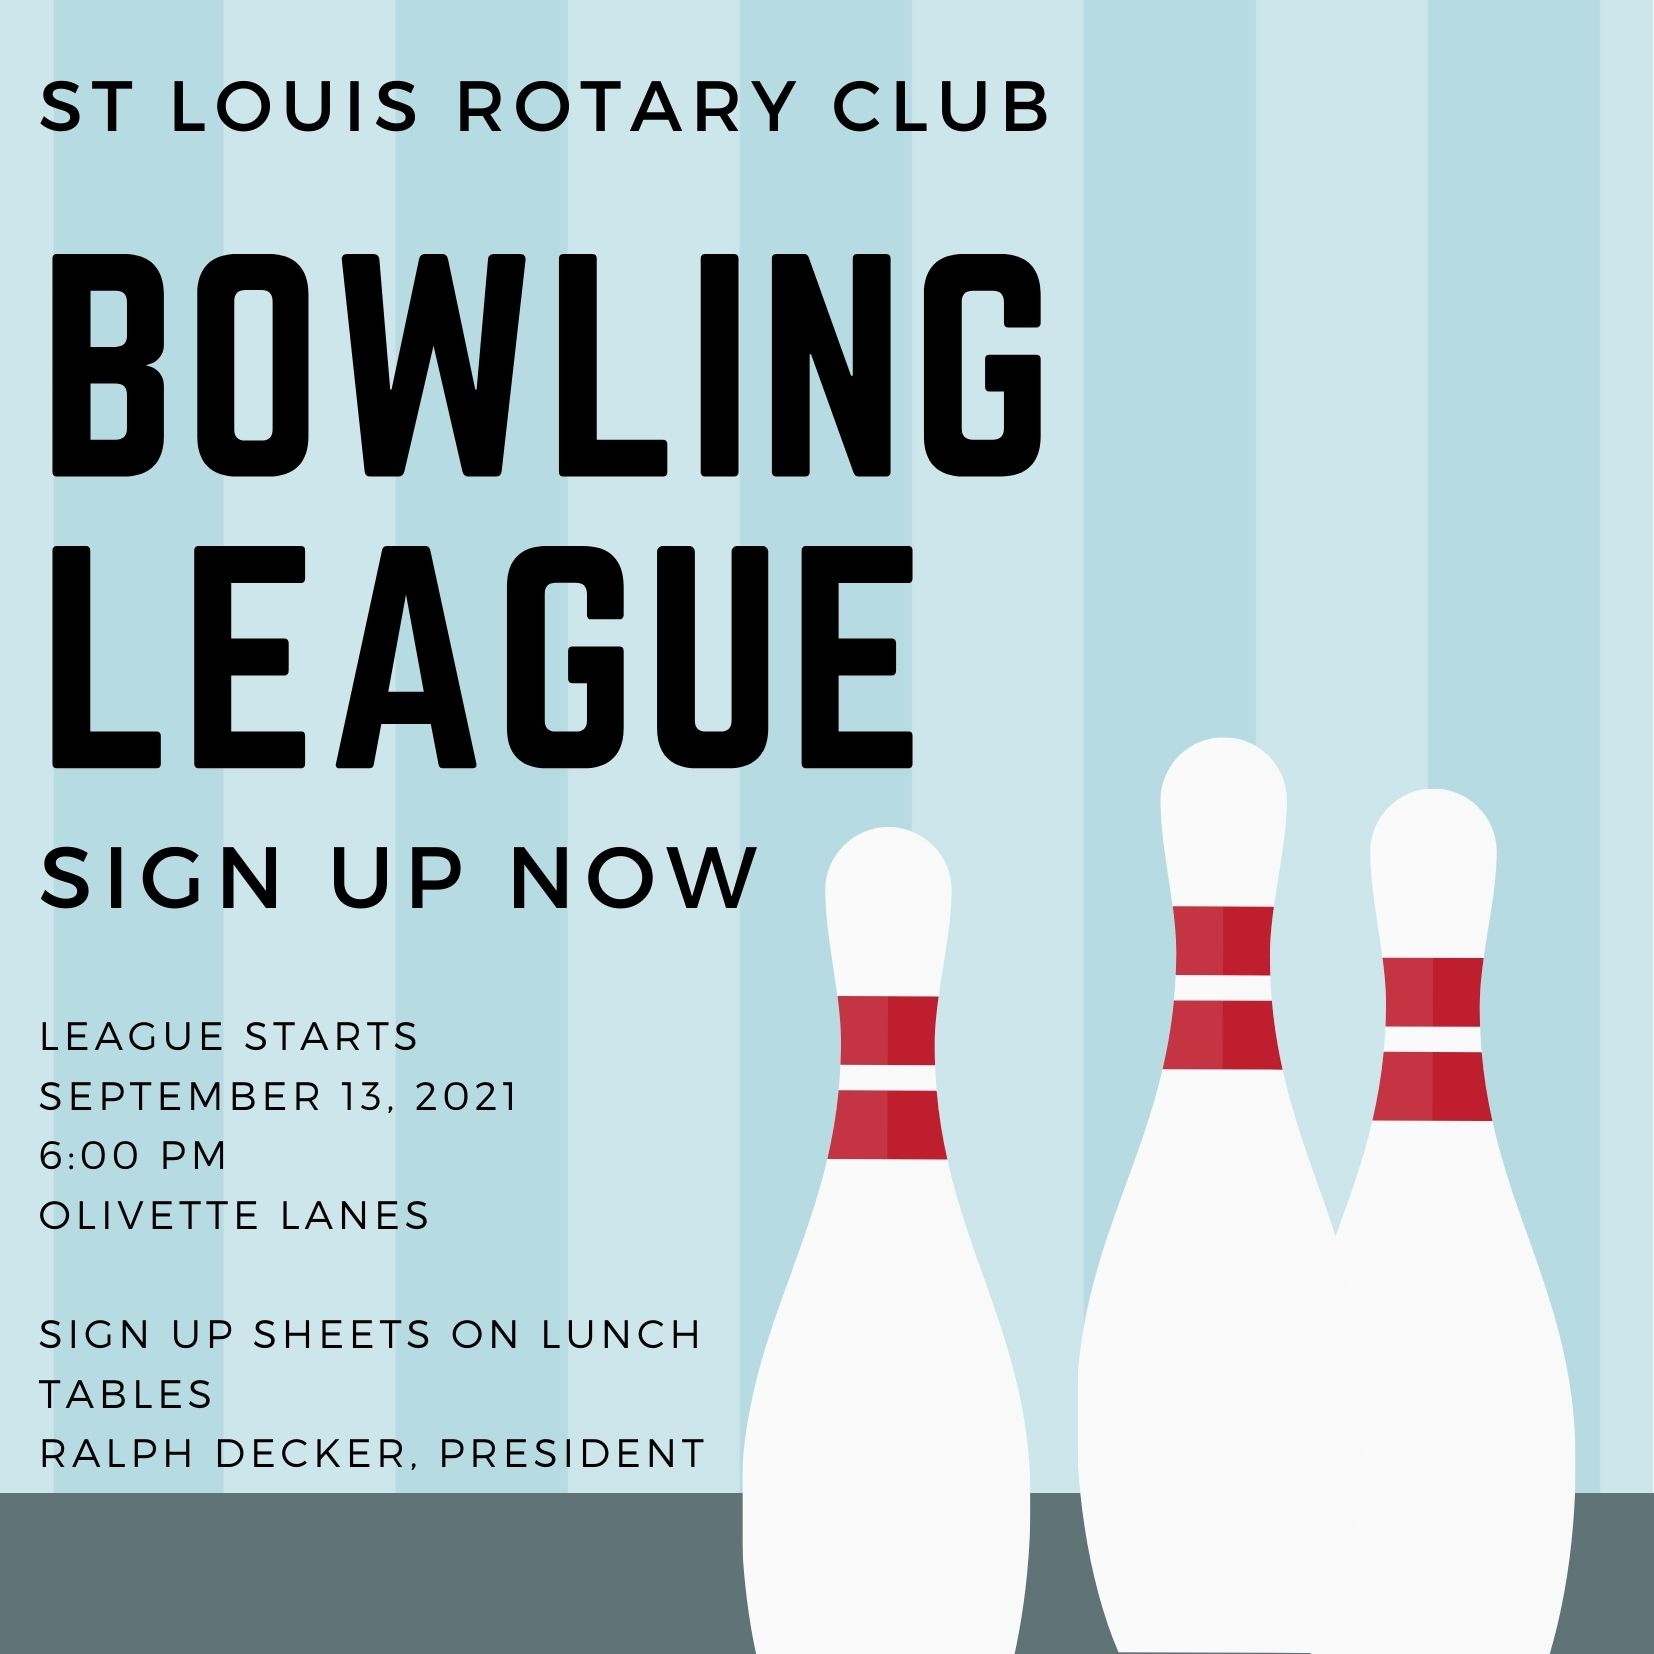 SIGN UP FOR Bowling LEAGUE